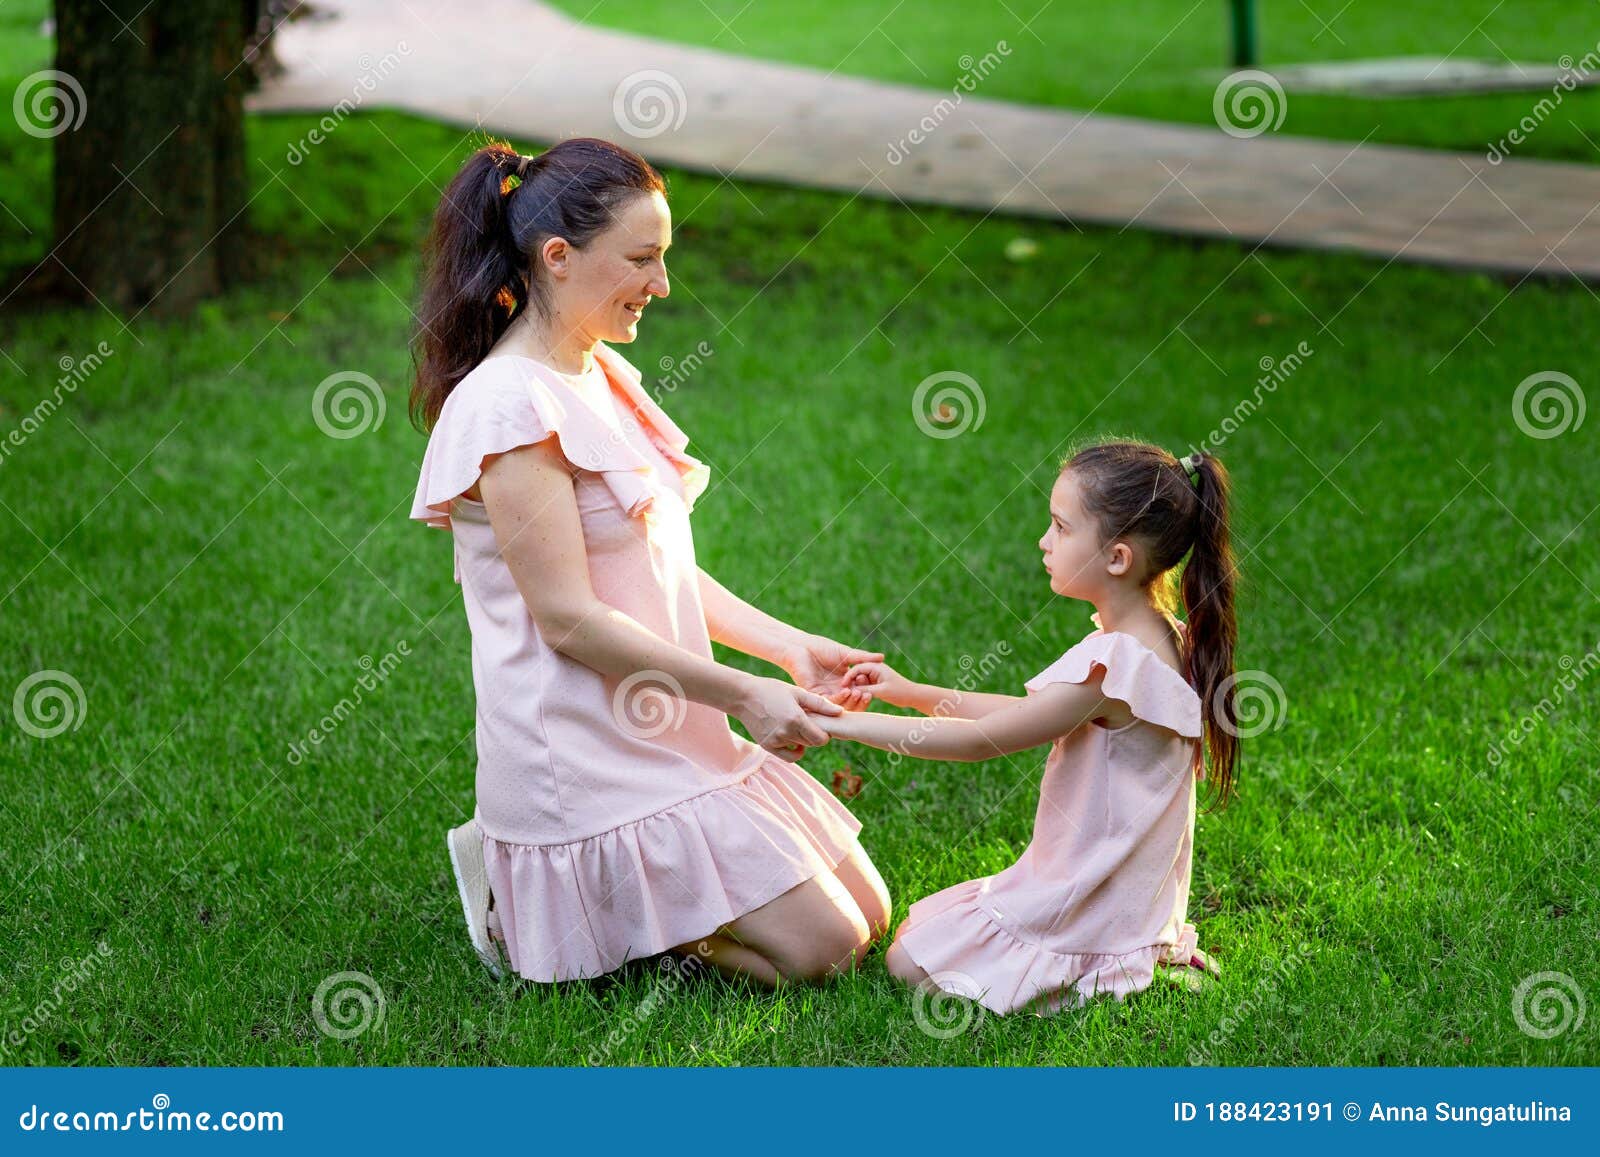 Mother And Daughter 5 6 Years Old Sit In The Park On The Grass And Hold Hands In The Summer A 